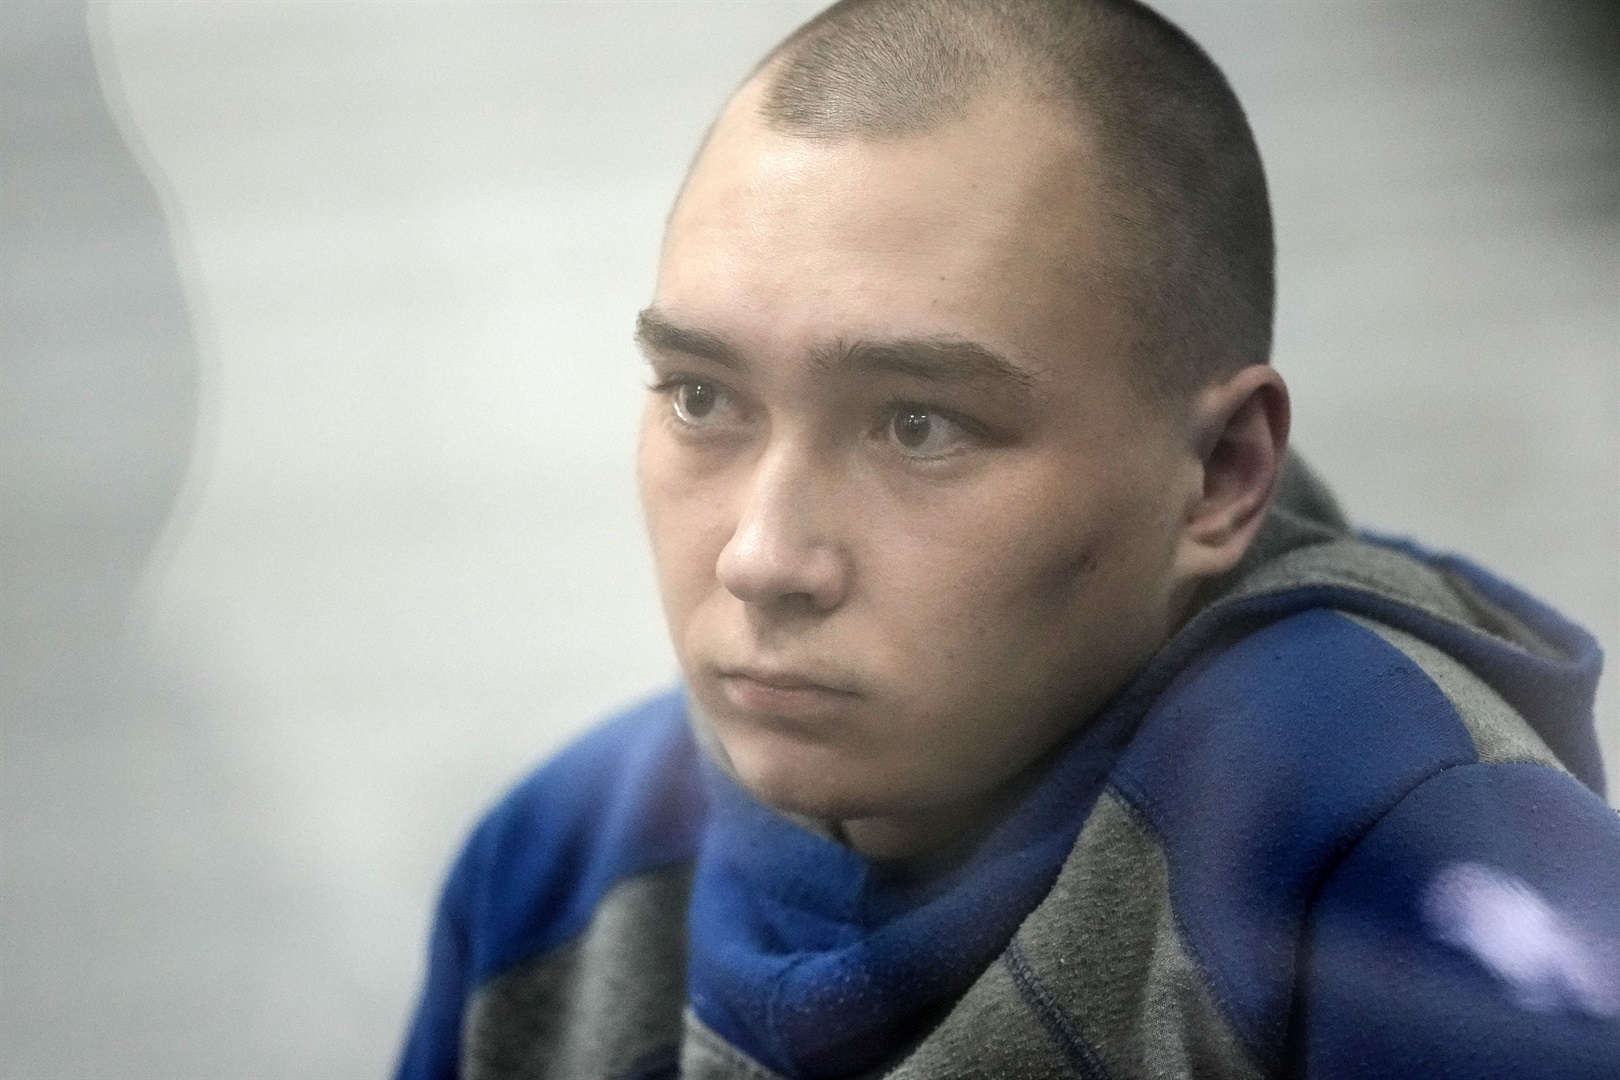 lawyer-asks-kyiv-war-crimes-trial-to-acquit-russian-soldier-news24